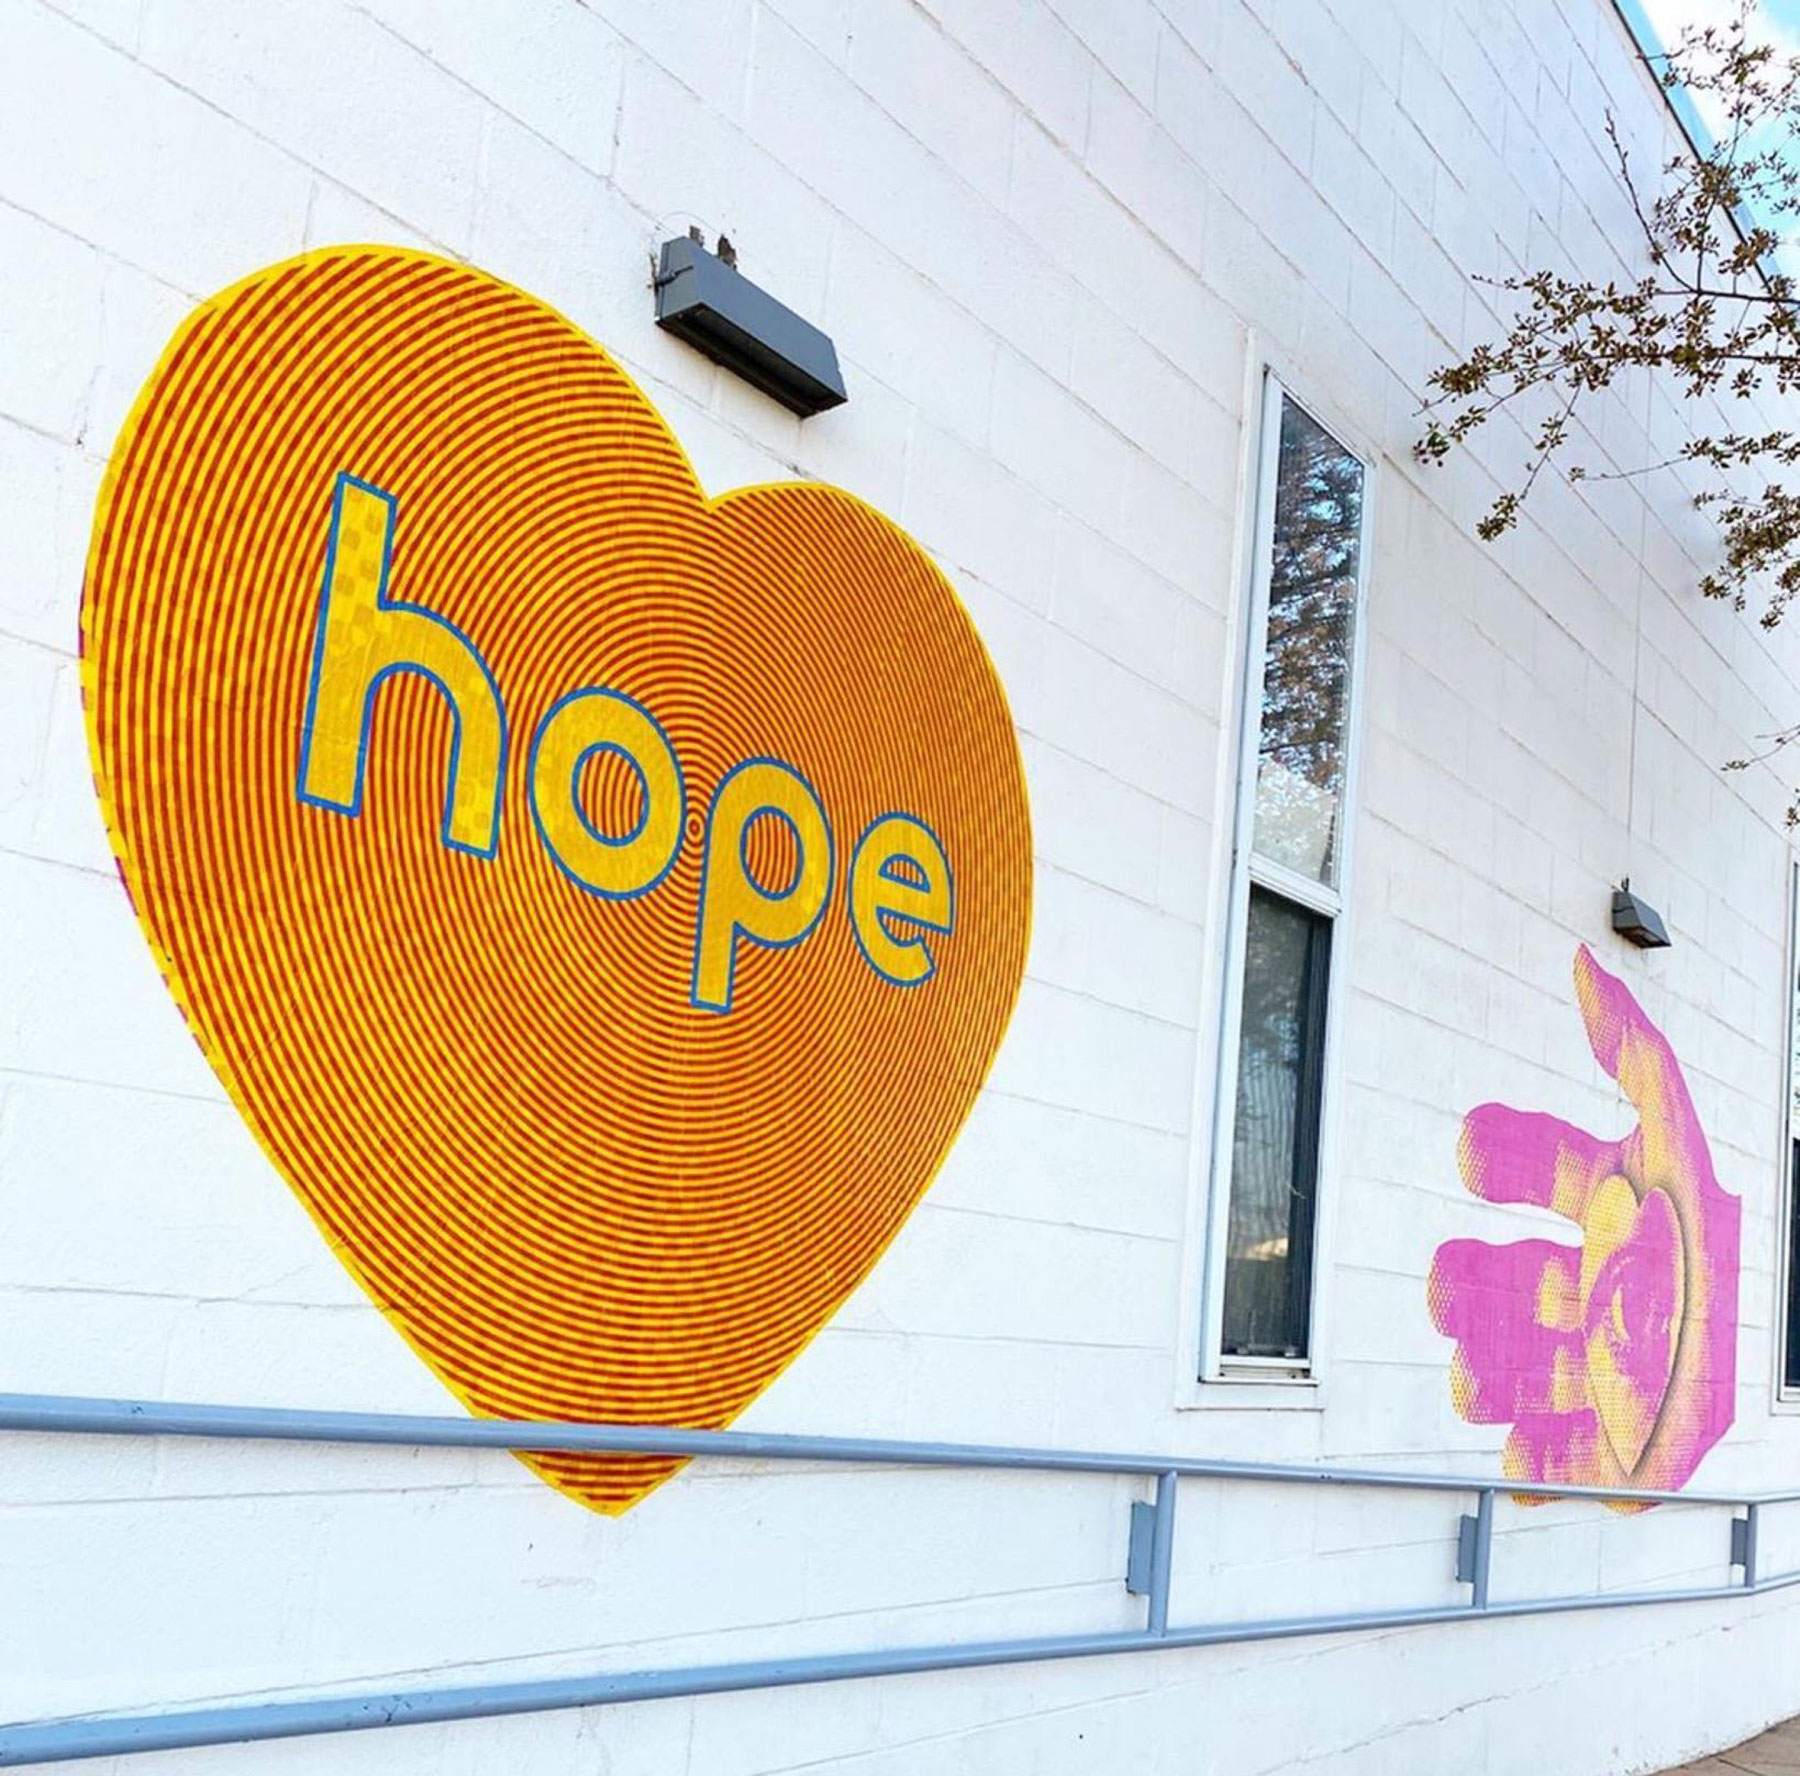 Wheat paste art by Koko Bayer. Orange heart with the word hope in yellow inside the heart pasted on the side of a white building.